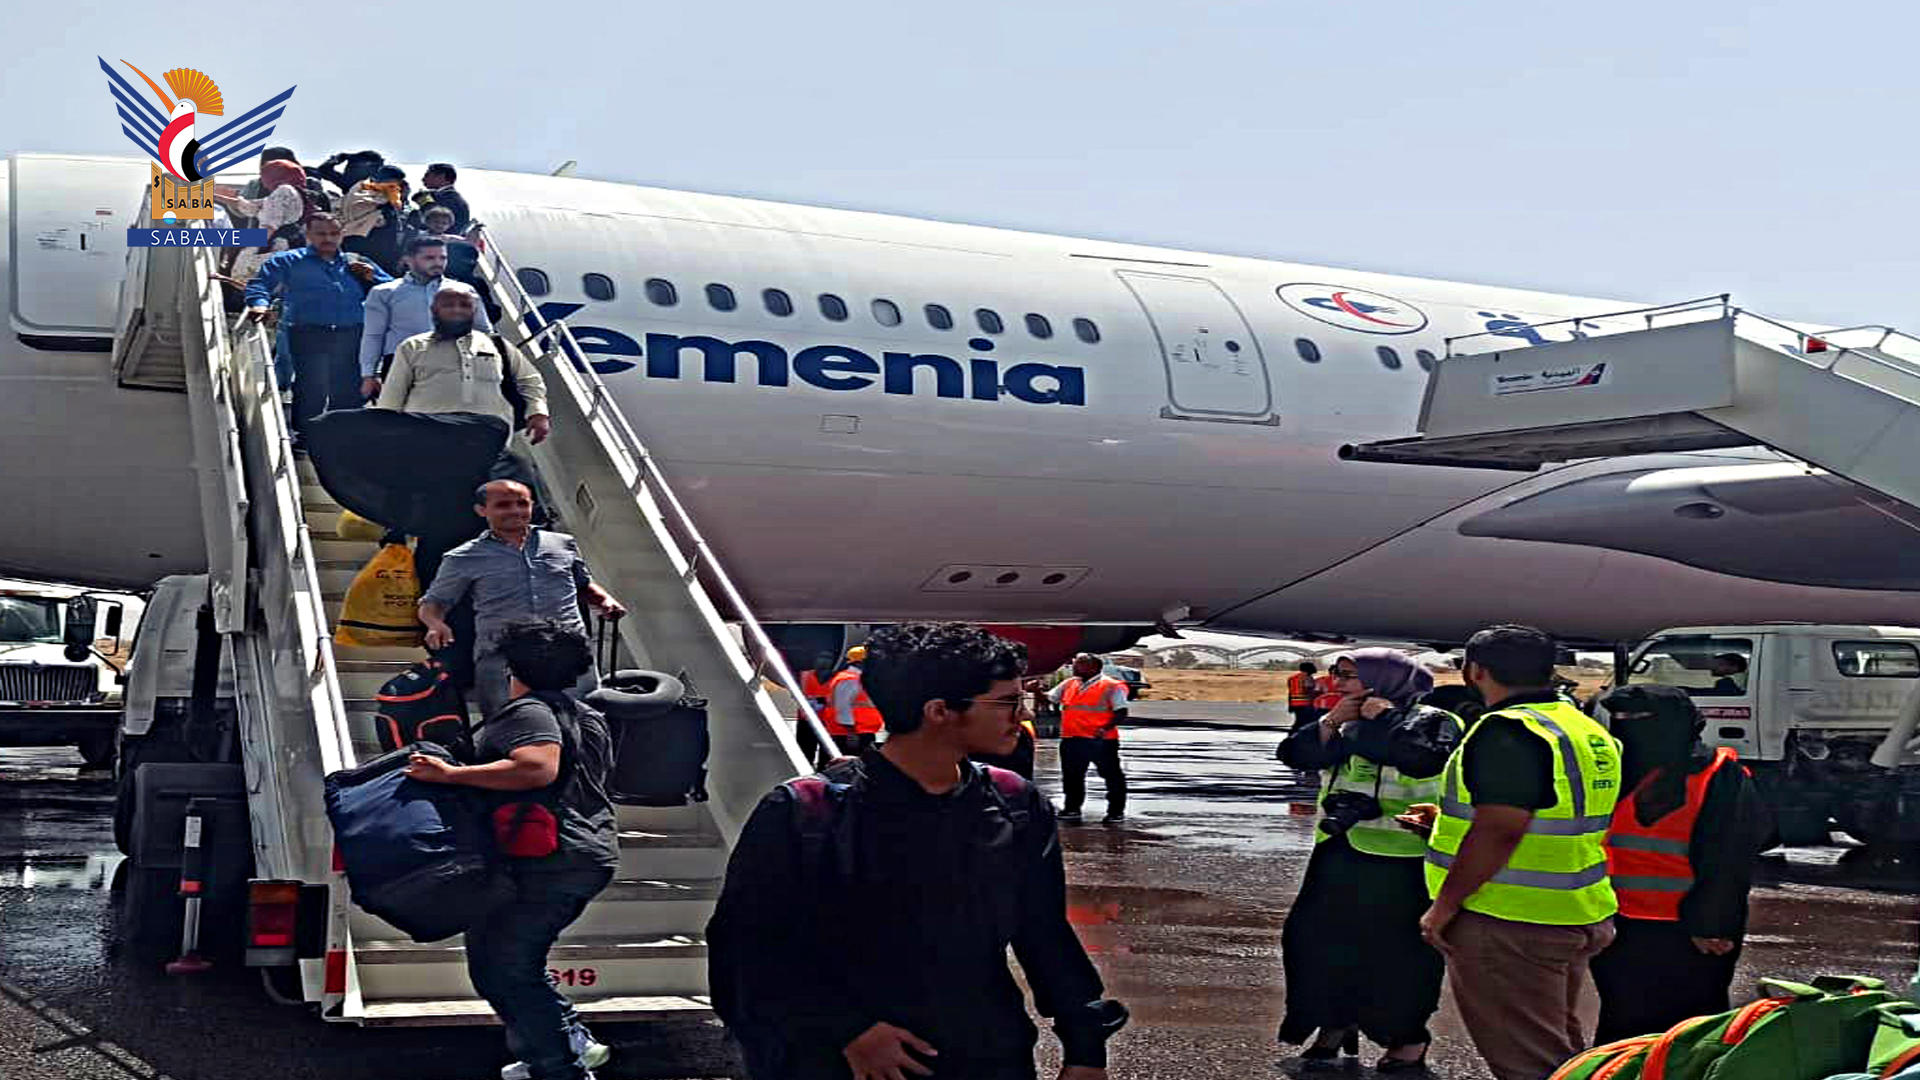 Over 200 passengers arrive at Sana'a Int'l Airport coming from Amman